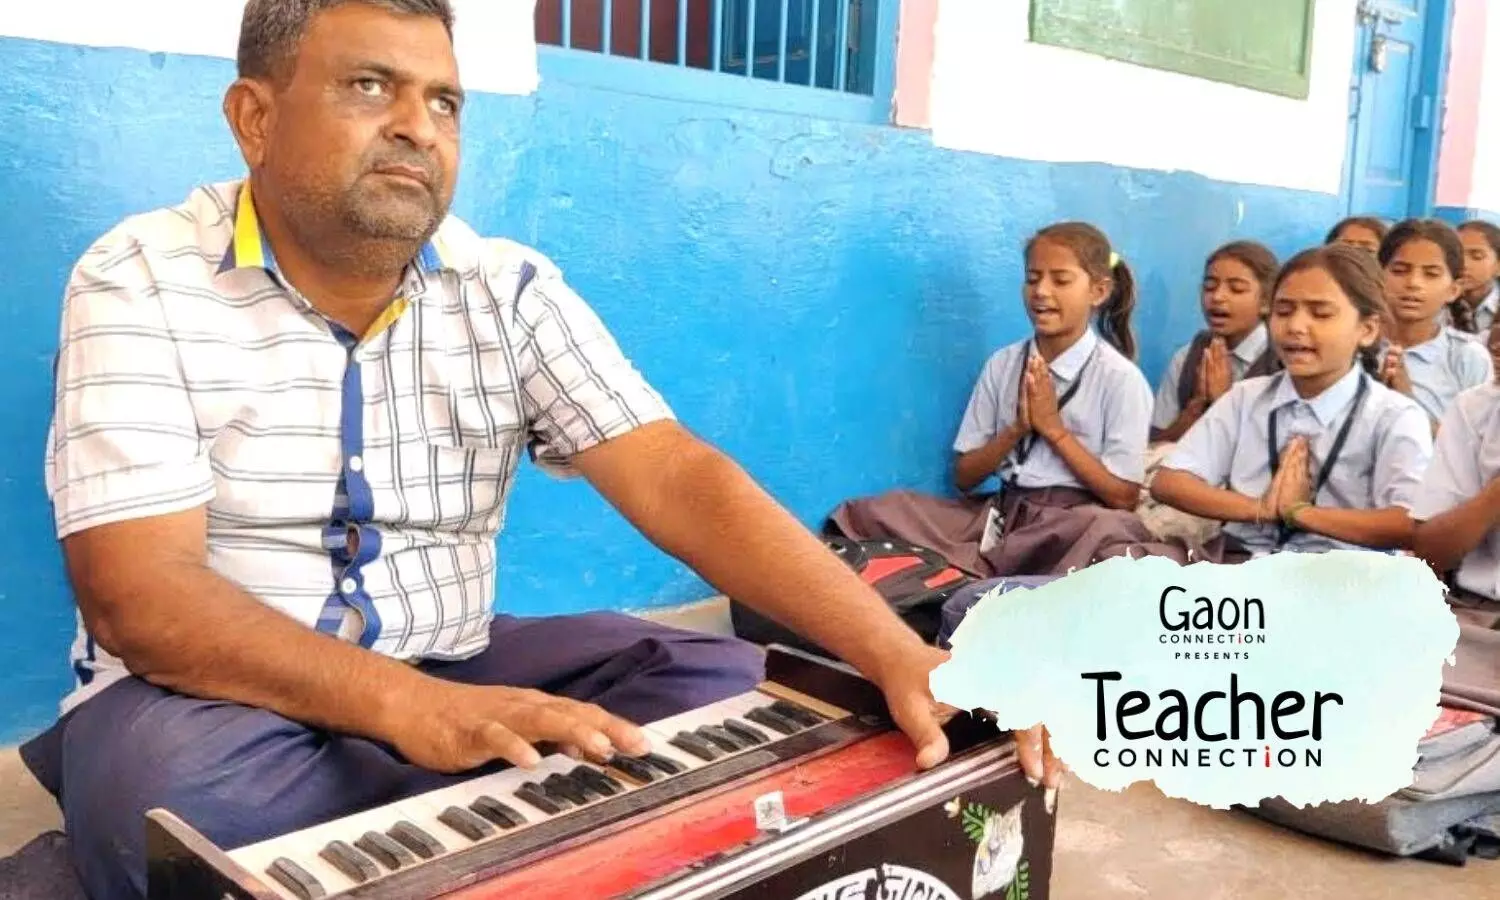 Being visually challenged in no way hampers Ramlal Jingar’s love for teaching